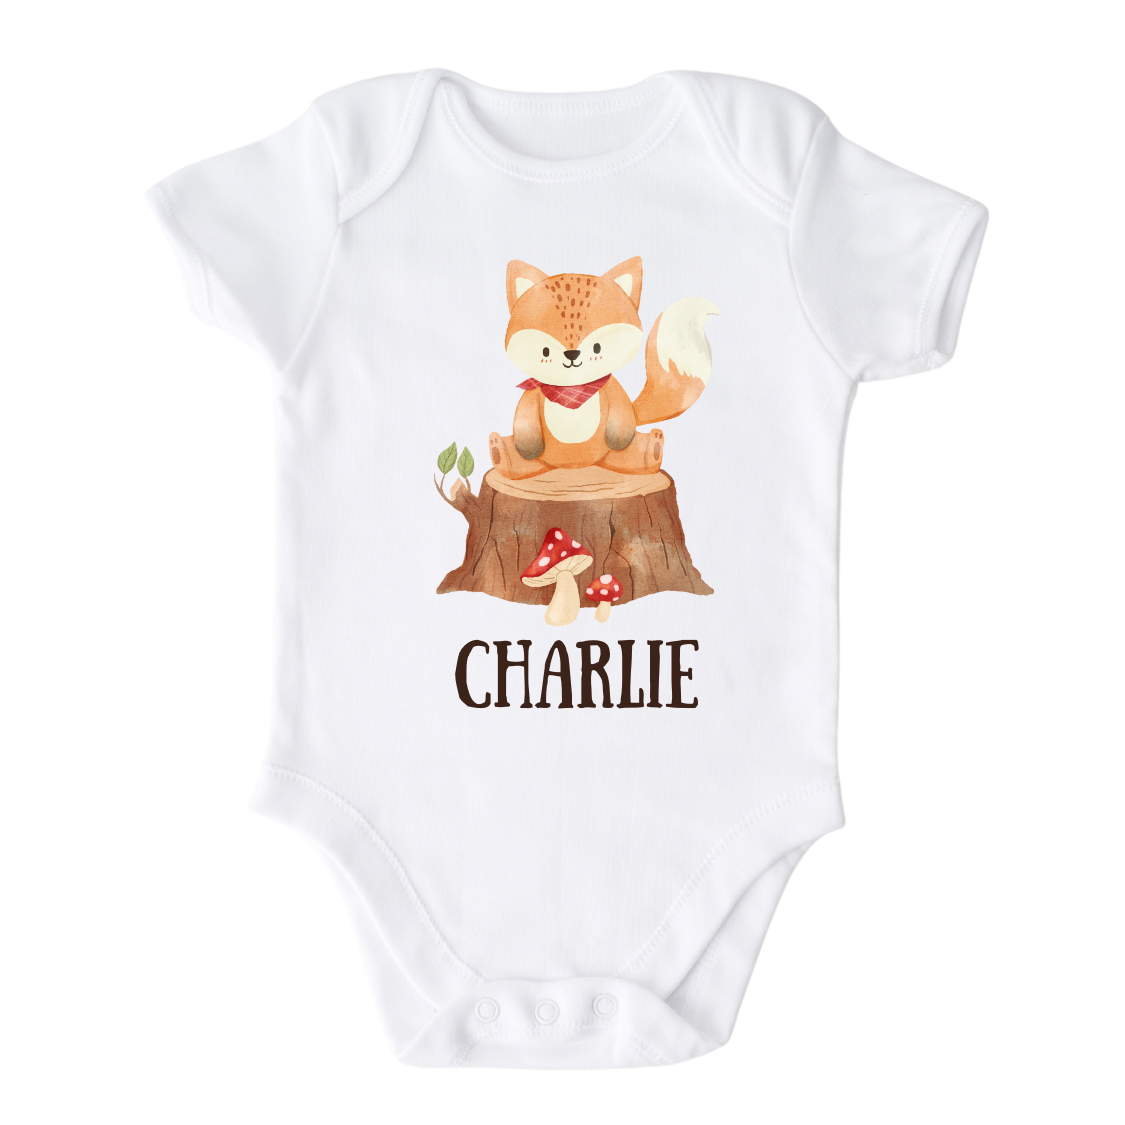 baby girl clothes baby essentials baby boy clothes newborn essentials must haves baby bodysuit gender neutral baby clothes baby boy outfits baby onesies